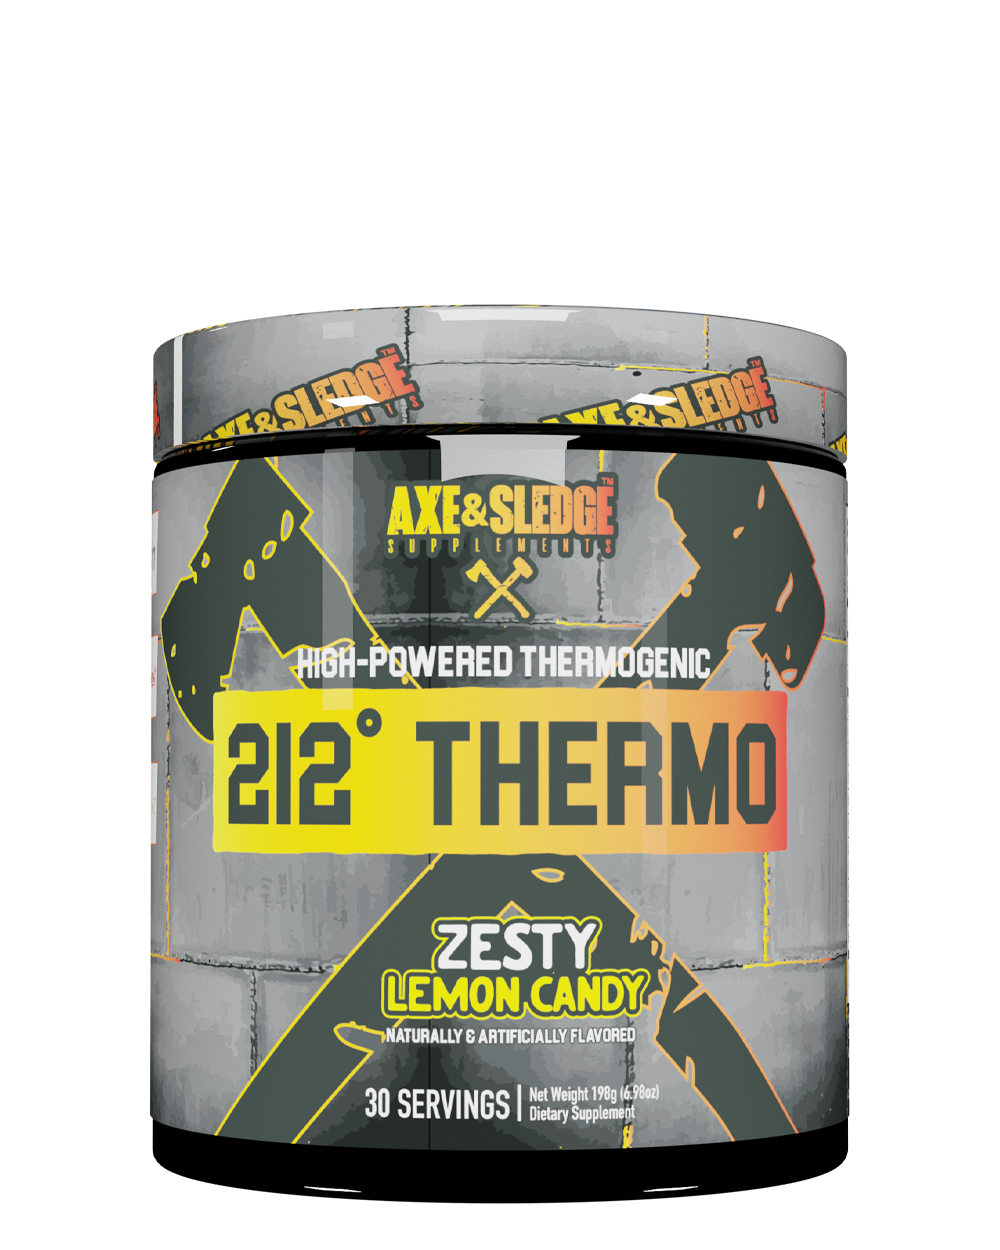 212° Thermo // Powdered Thermogenic